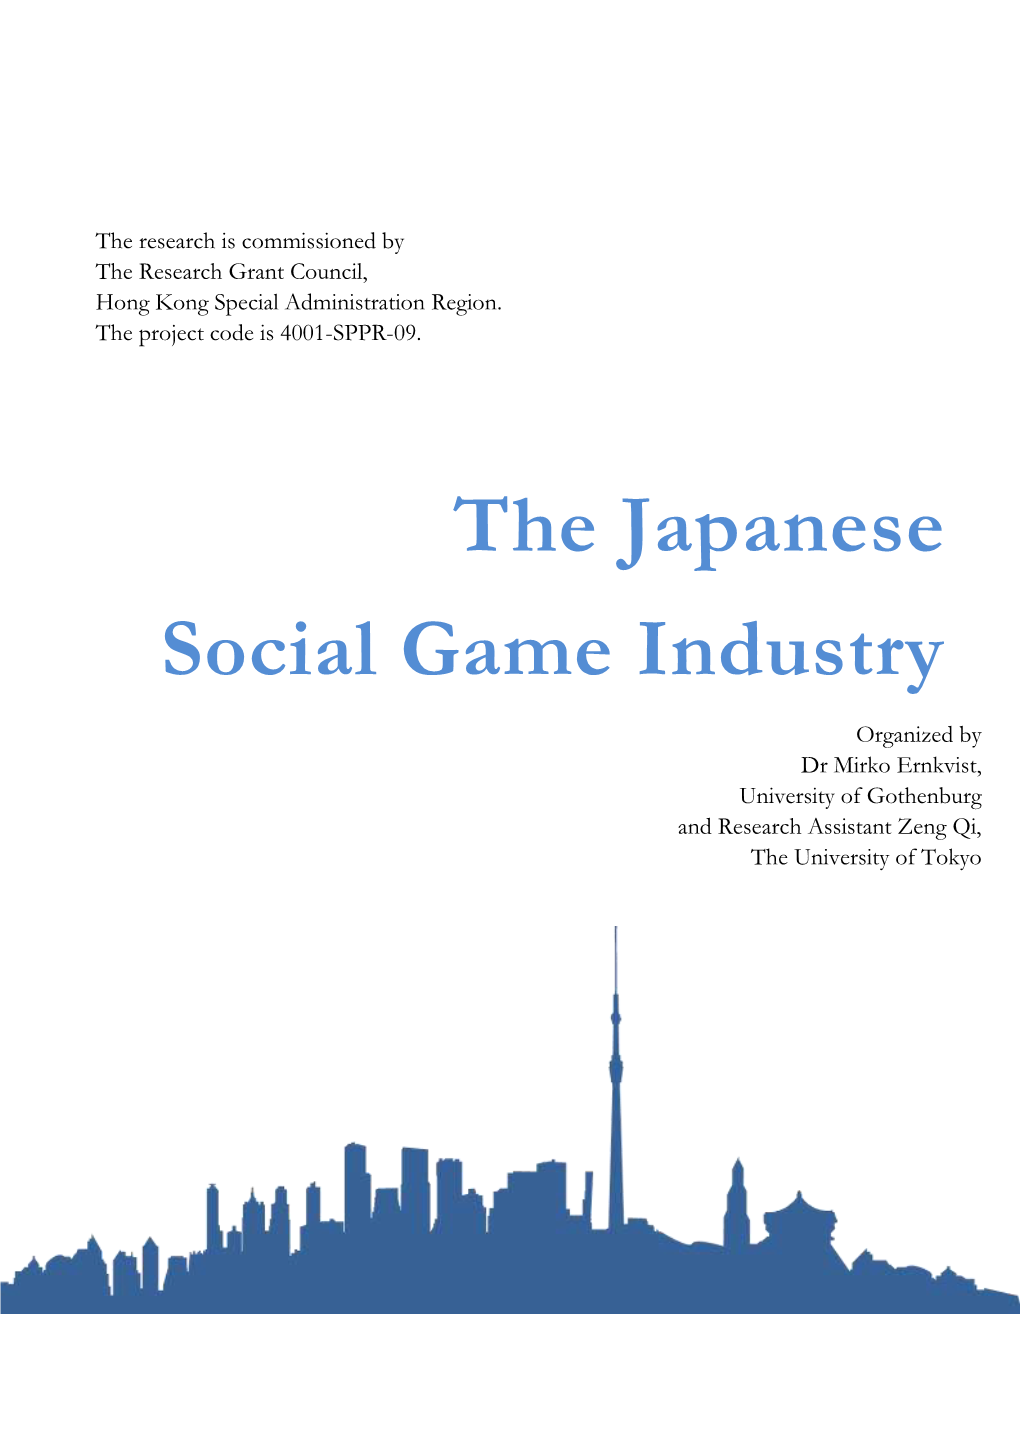 The Japanese Social Game Industry